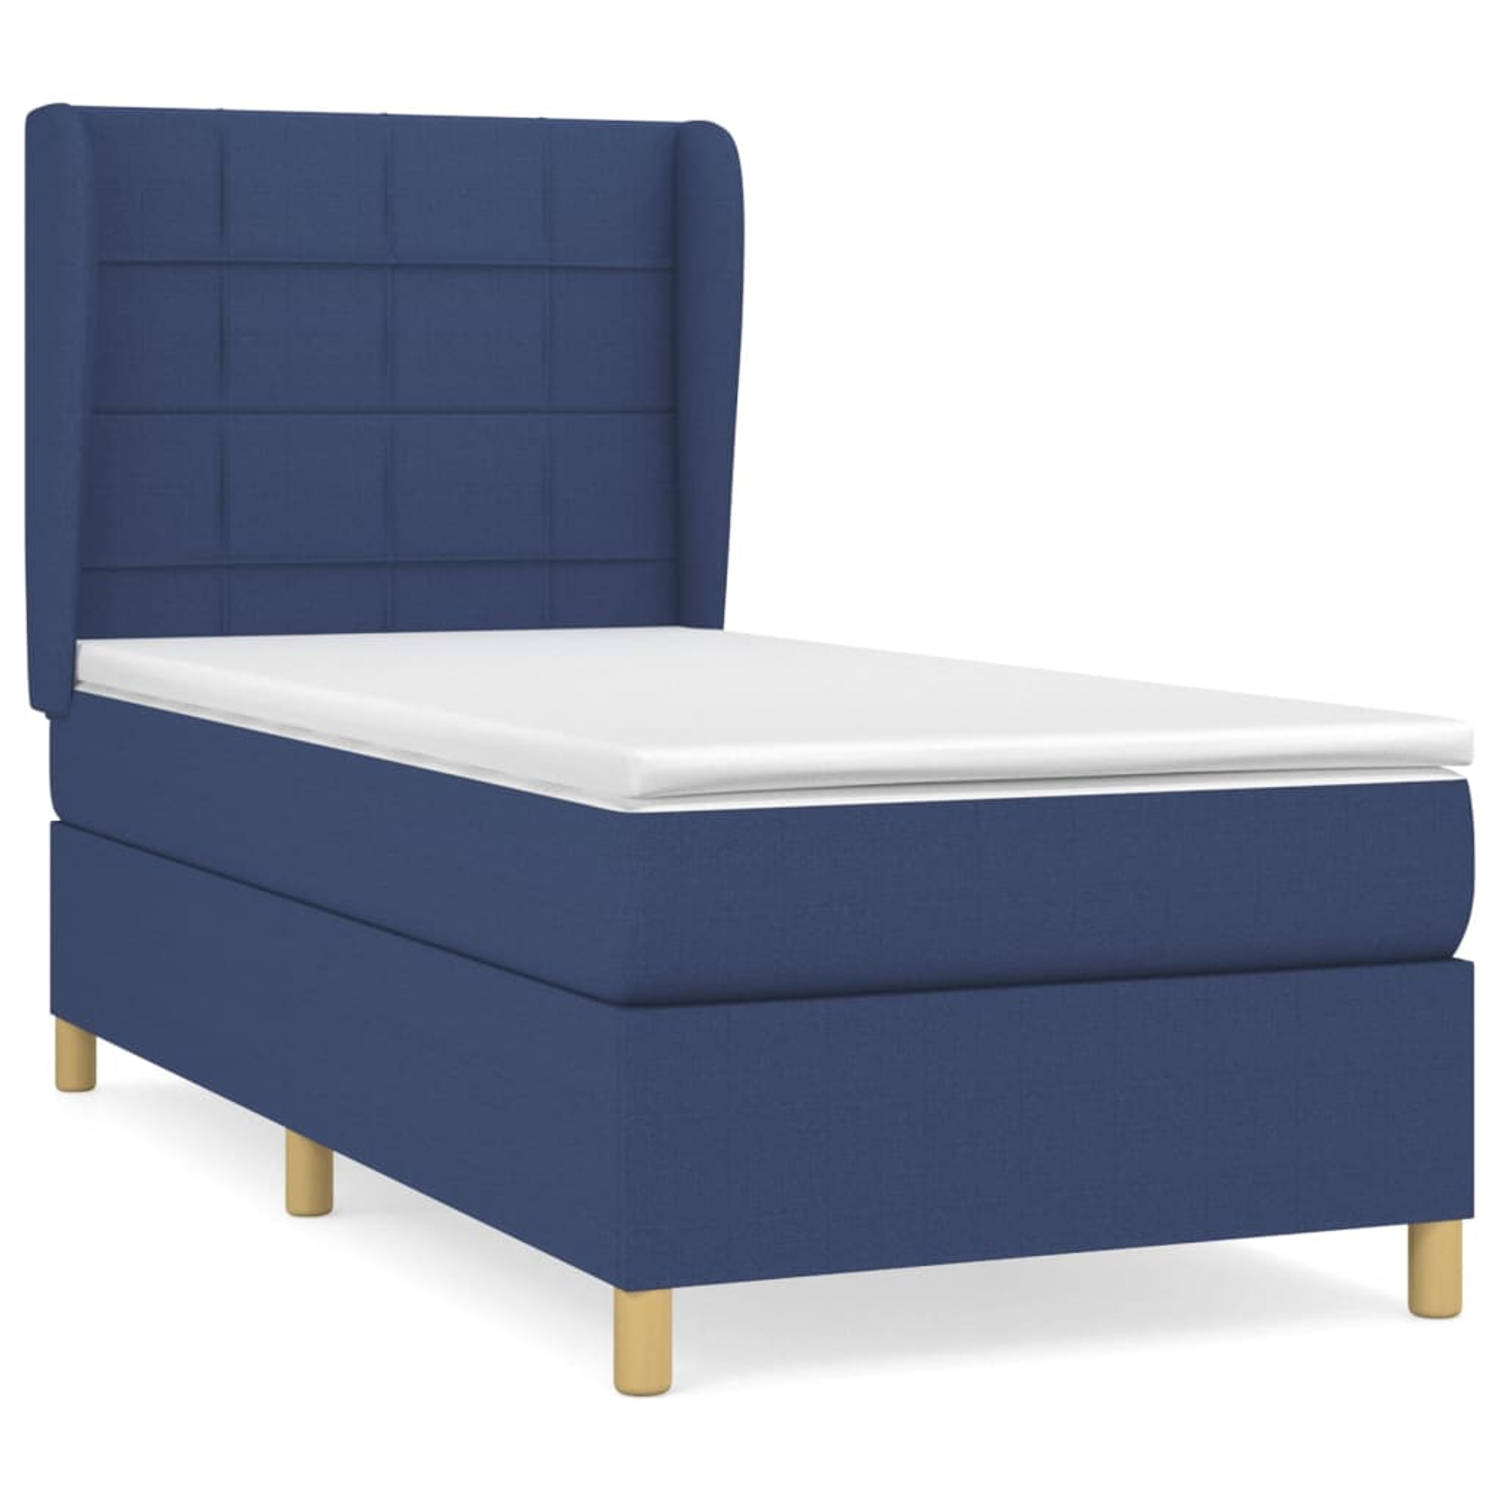 The Living Store Boxspringbed - Luxe - Blauw - 203x93x118/128 cm - Pocketvering matras